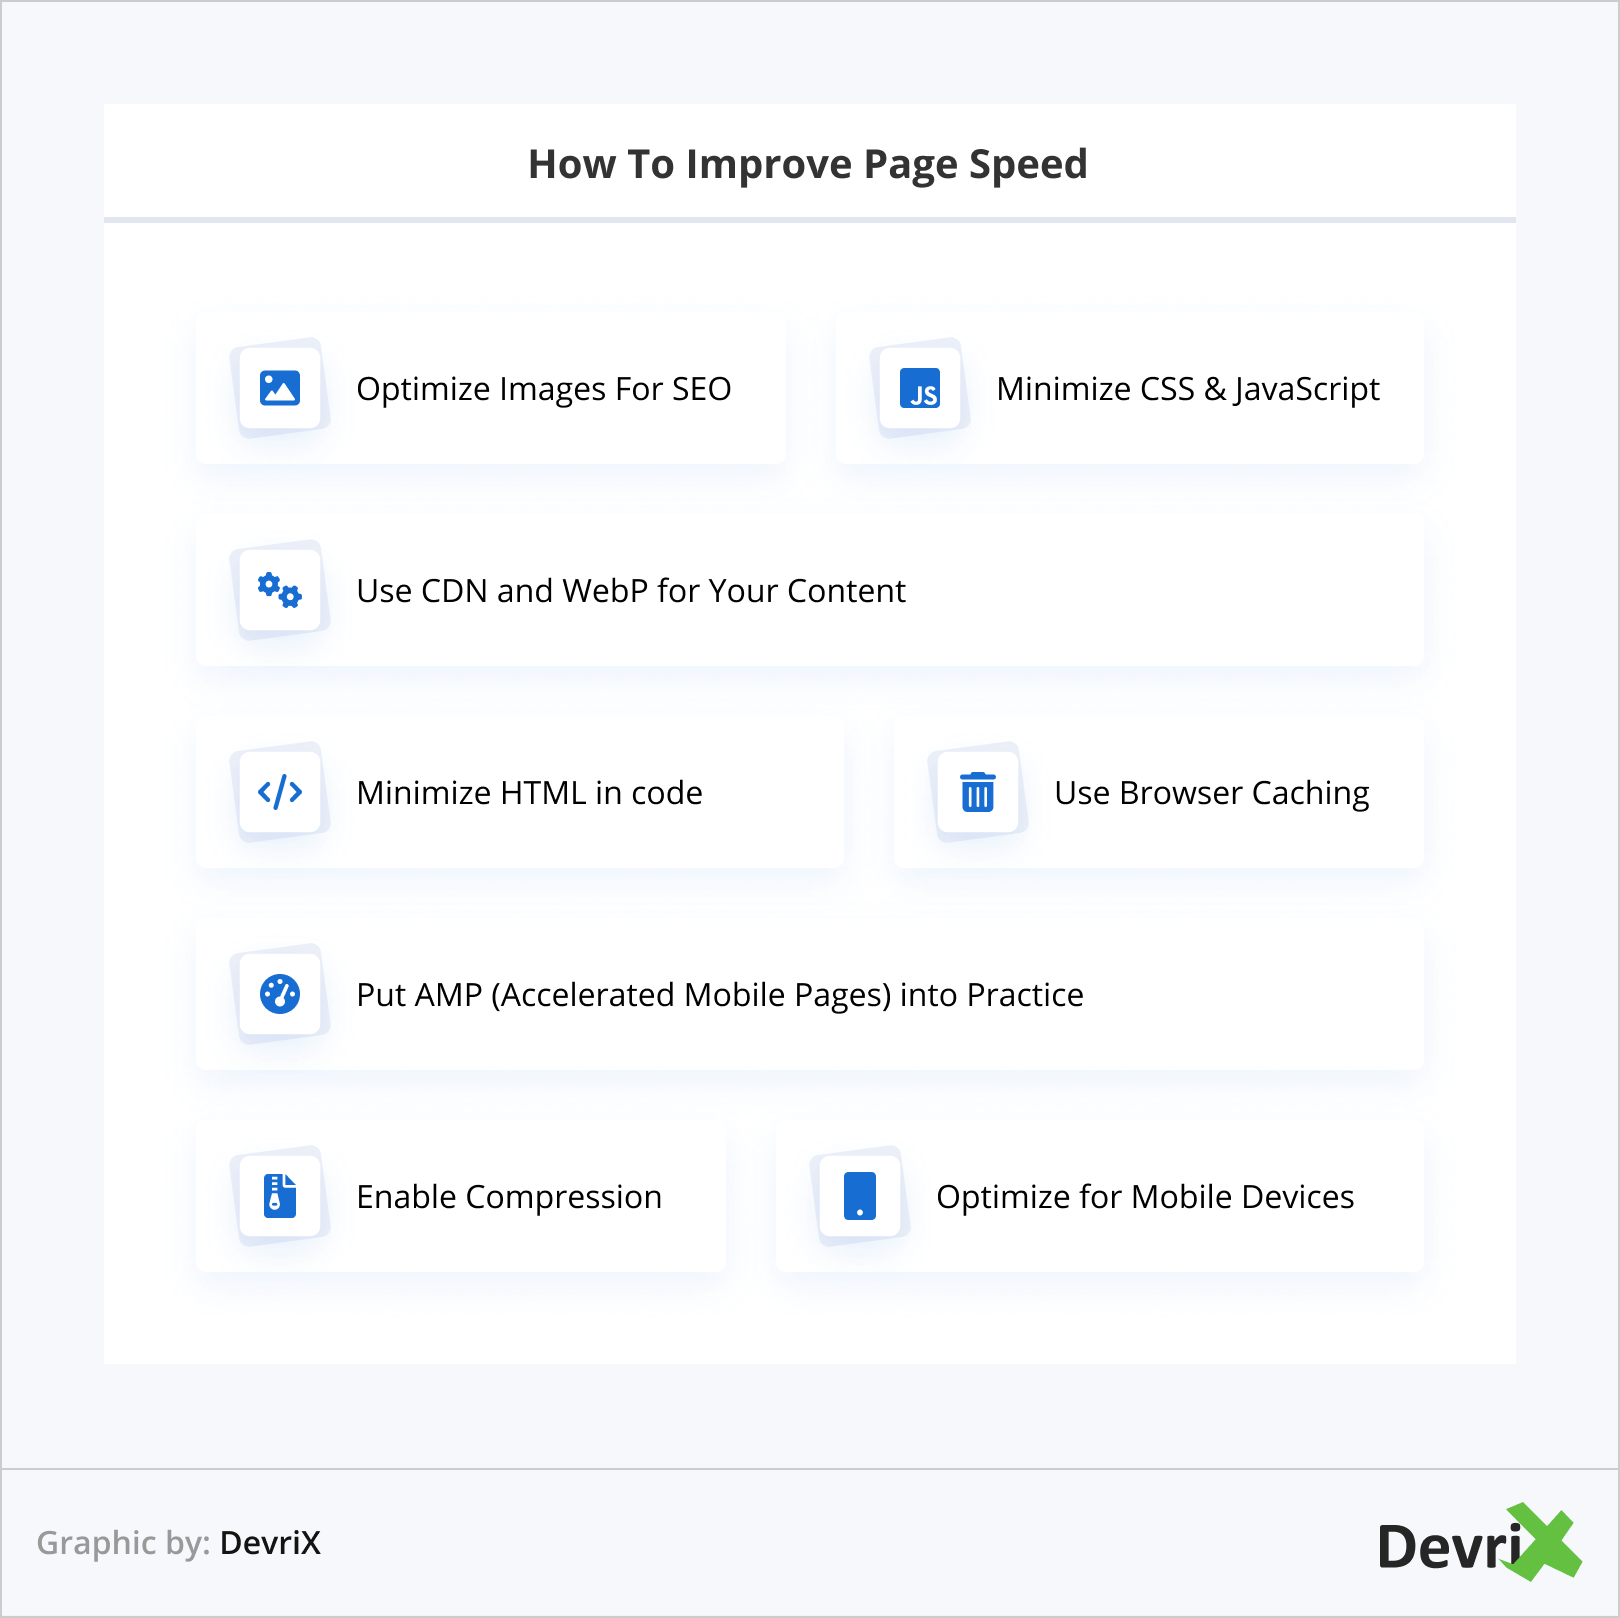 How To Improve Page Speed